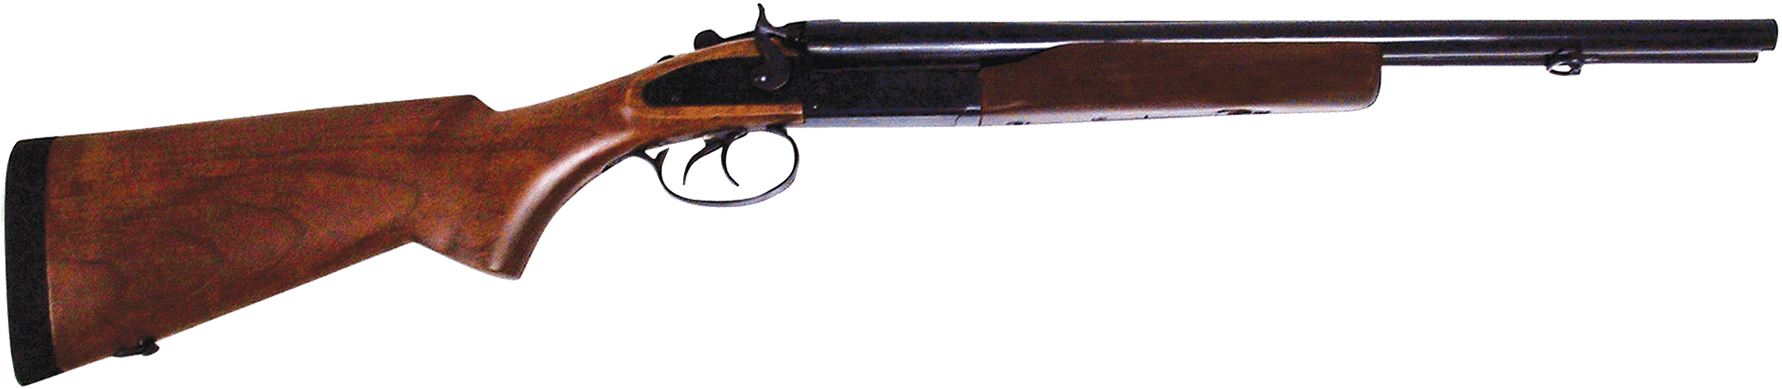 70780 - Lever Action With Pistol Grip (1800x412), Png Download